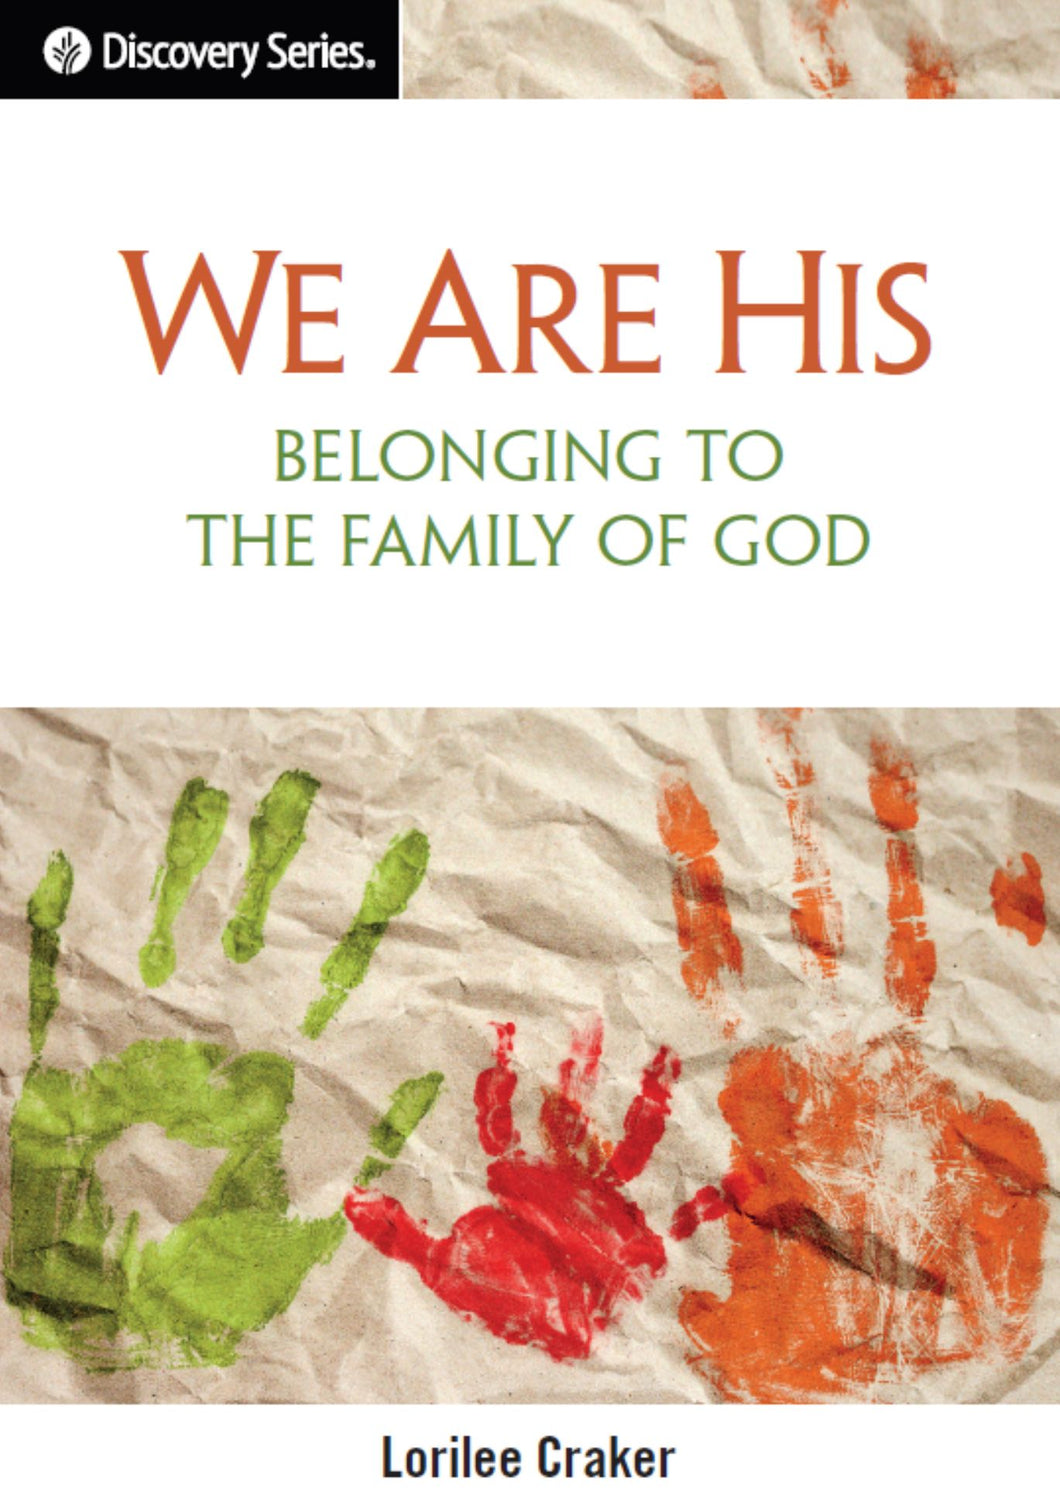 We are His - Belonging to The Family of God